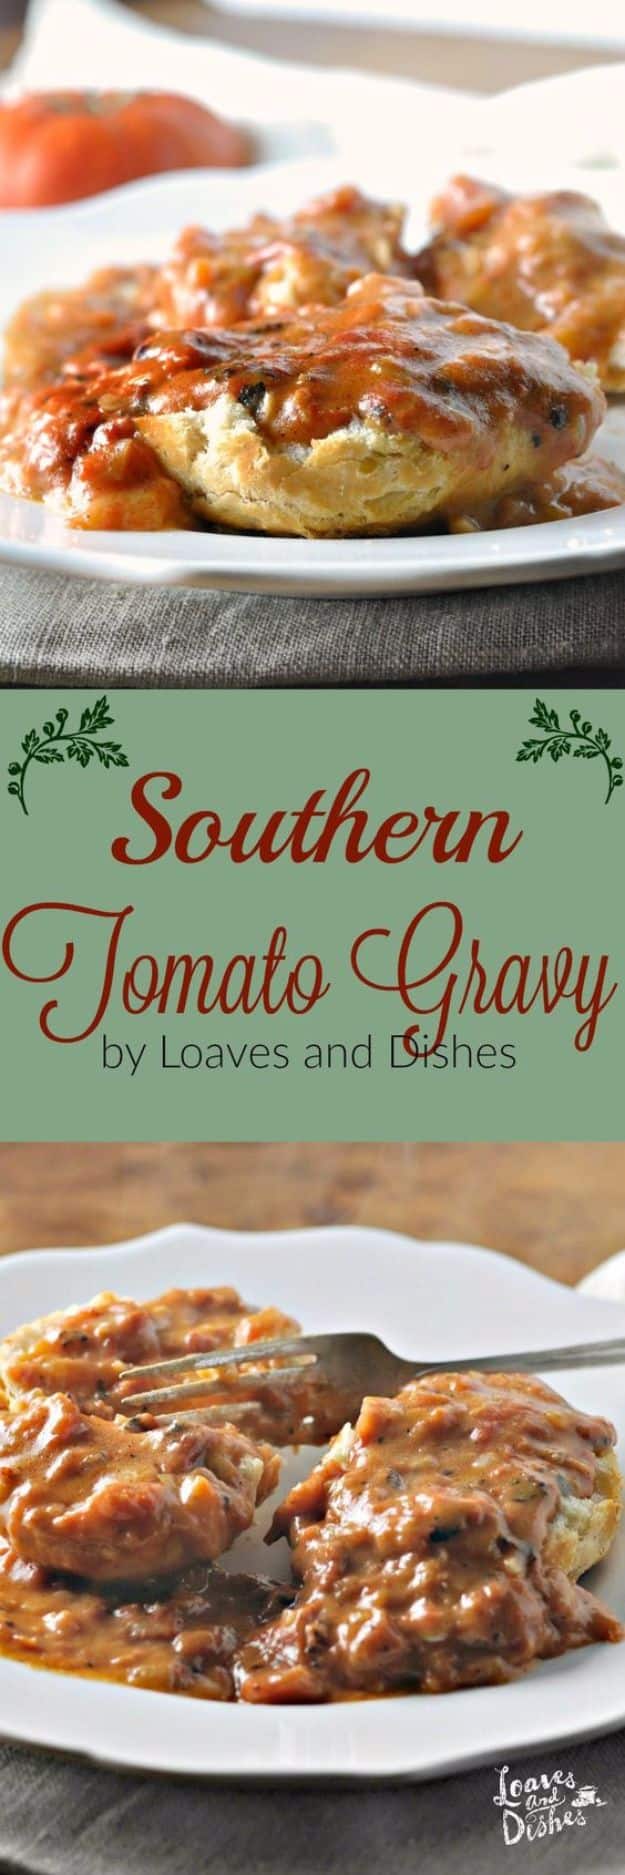 Best Country Cooking Recipes - Southern Tomato Gravy - Easy Recipes for Country Food Like Chicken Fried Steak, Fried Green Tomatoes, Southern Gravy, Breads and Biscuits, Casseroles and More - Breakfast, Lunch and Dinner Recipe Ideas for Families and Feeding A Crowd - Step by Step Instructions for Making Homestyle Dips, Snacks, Desserts #recipes